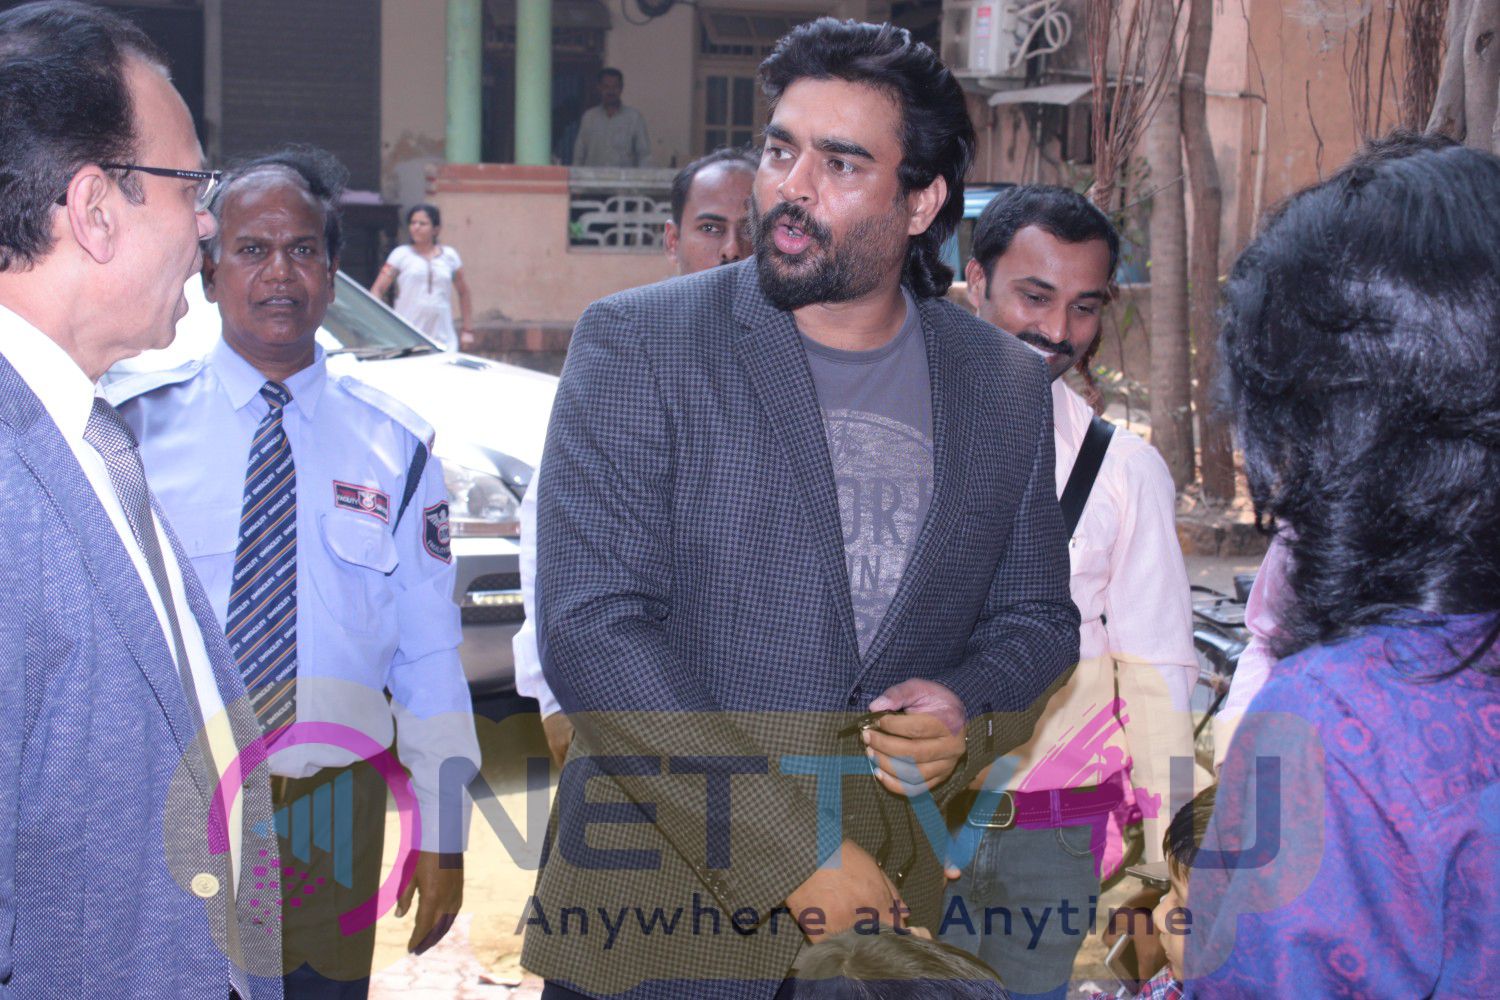 R Madhavan On The Cover Of Health & Nutrition Magazine Event Stills Hindi Gallery